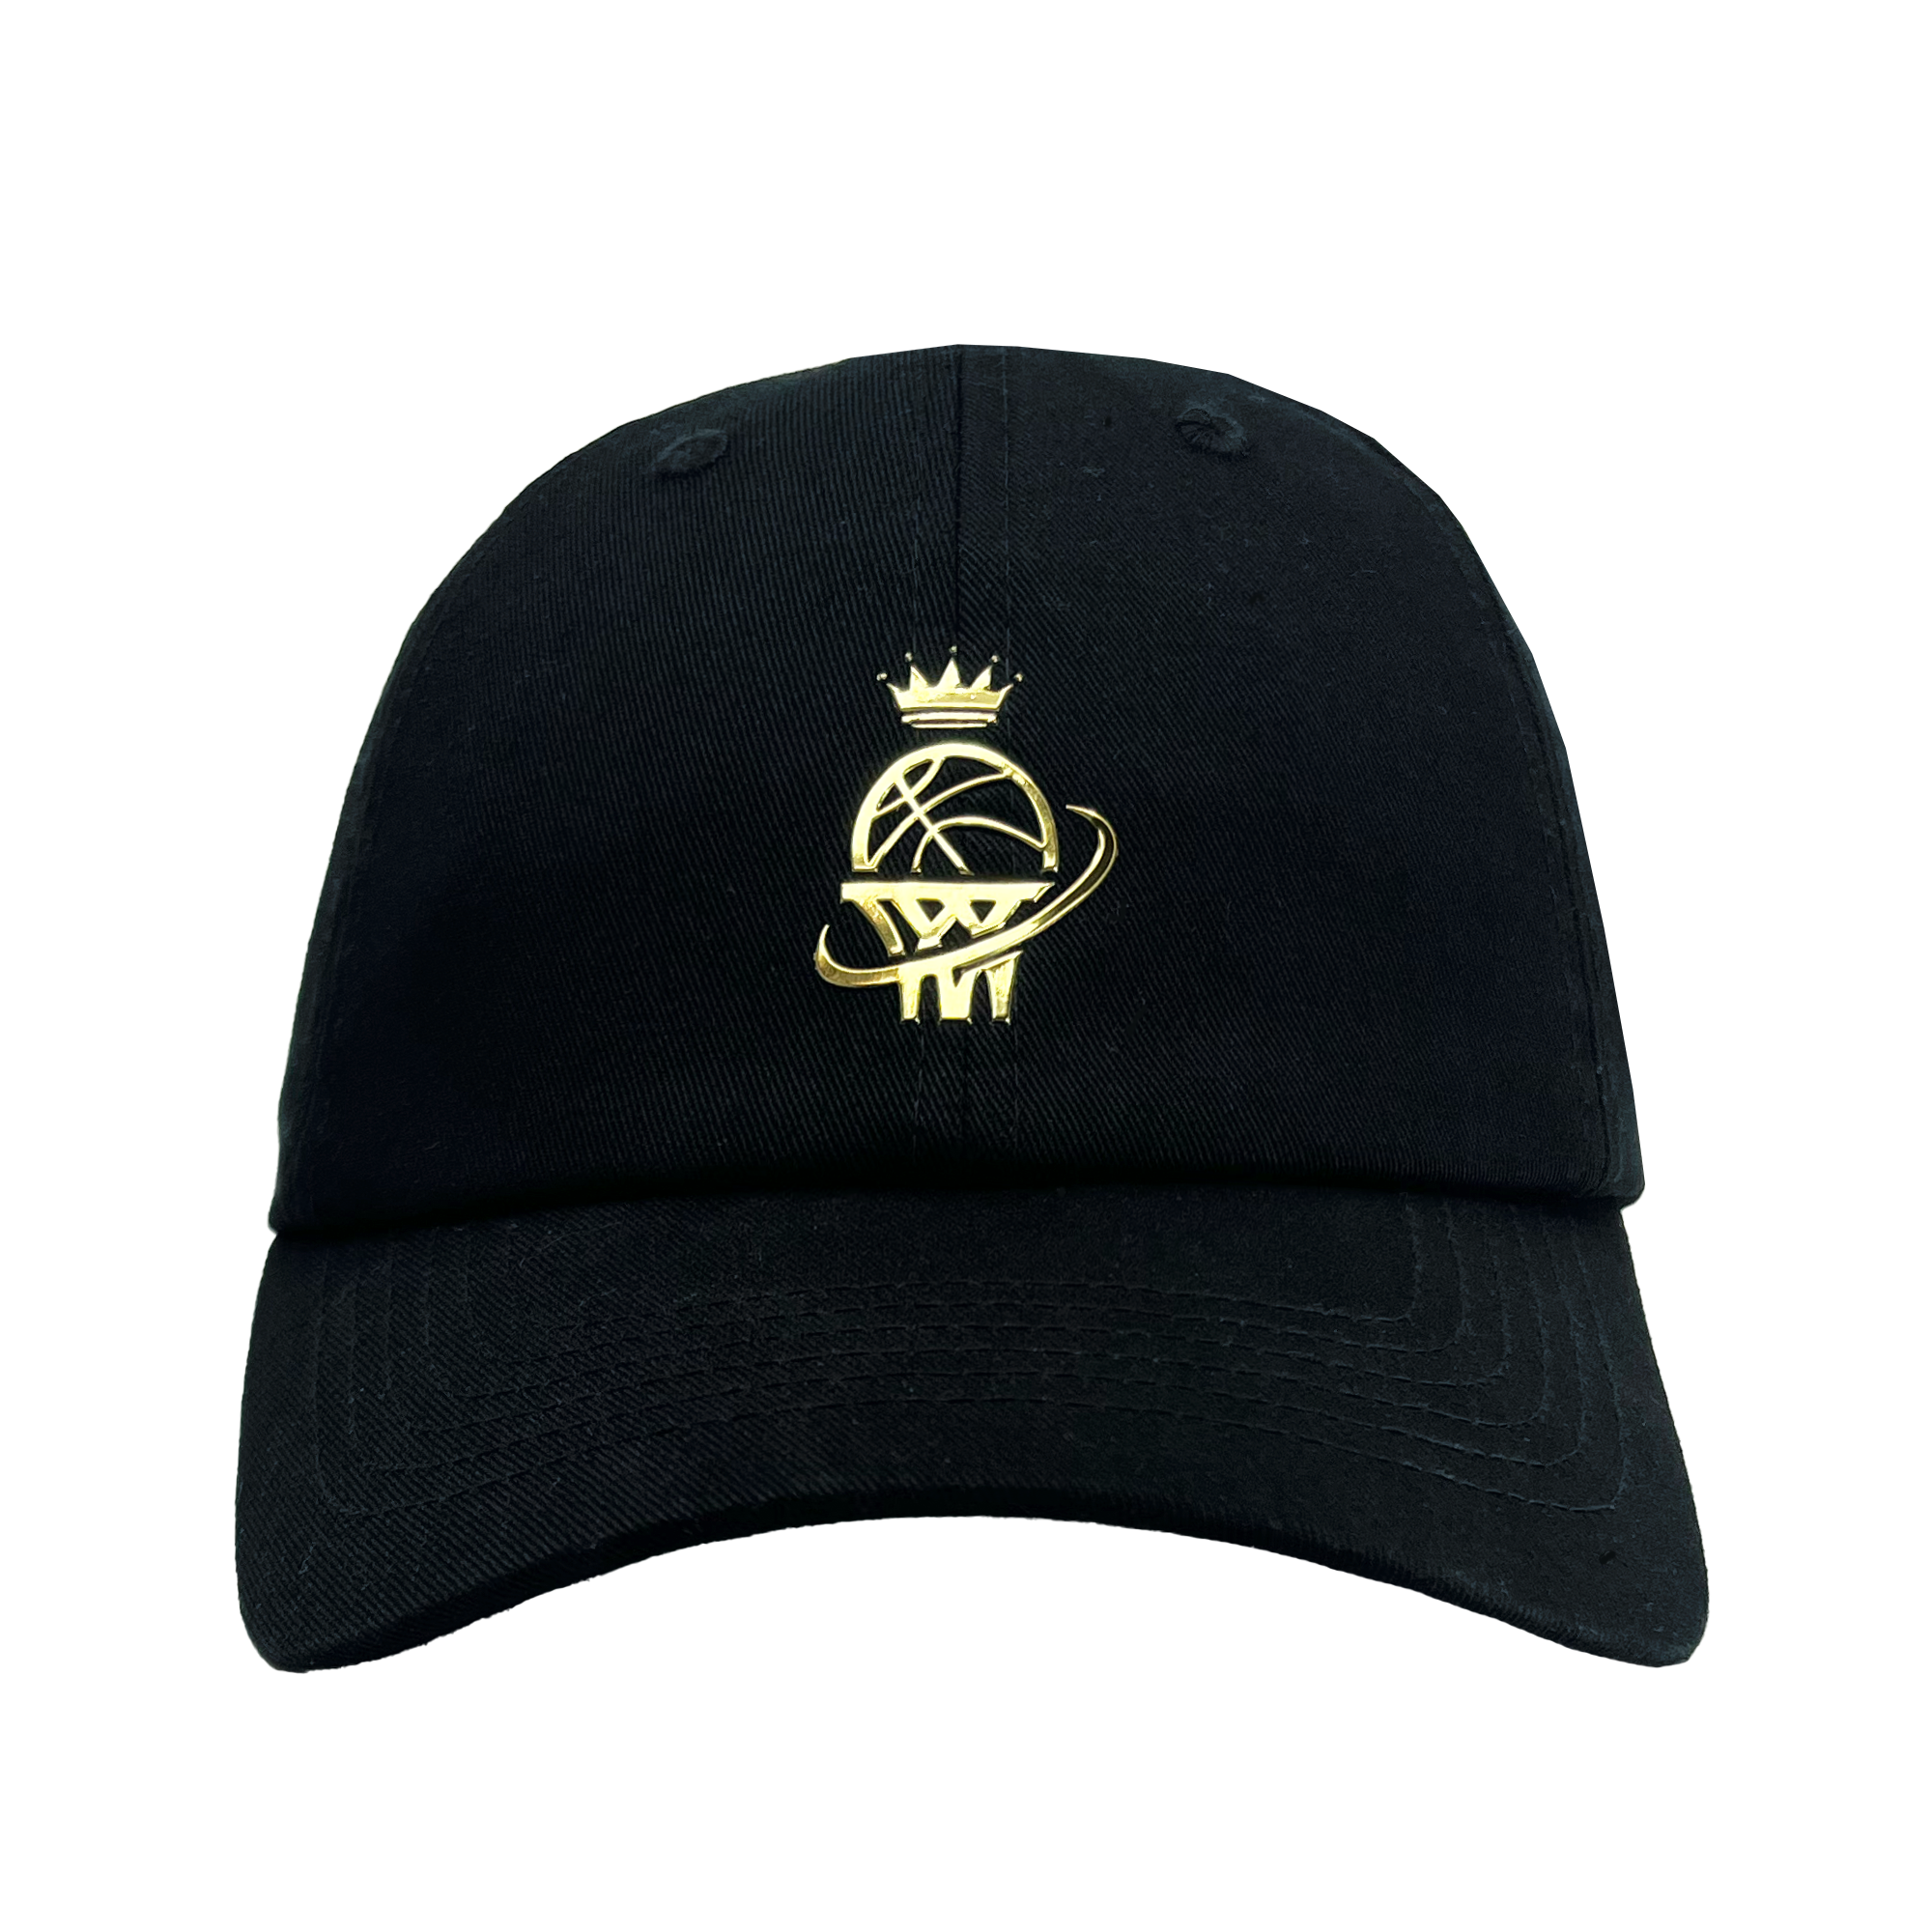 Front view of a black ball cap with gold WPBA logo on the front crown.